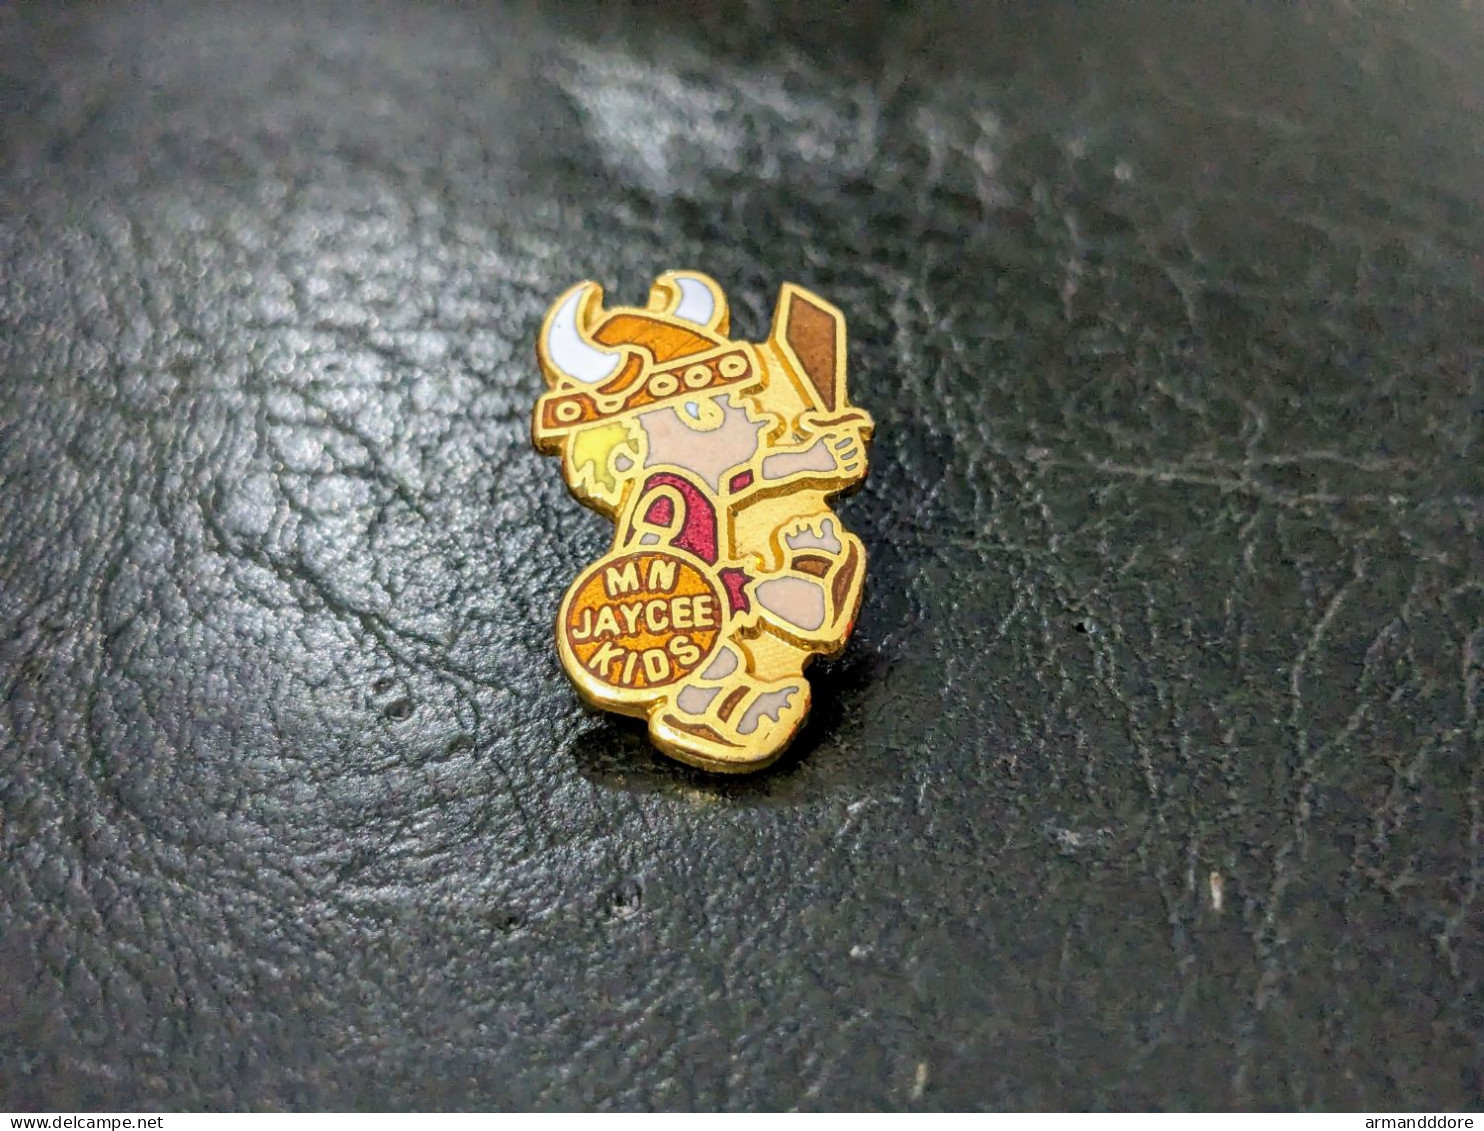 M Pin's Pins MN Jaycee Kids Minnesota Vikings NFL Lapel Pin Football Youth Camp Badge Americain US Taille : 25 * 14 Mm T - Voetbal